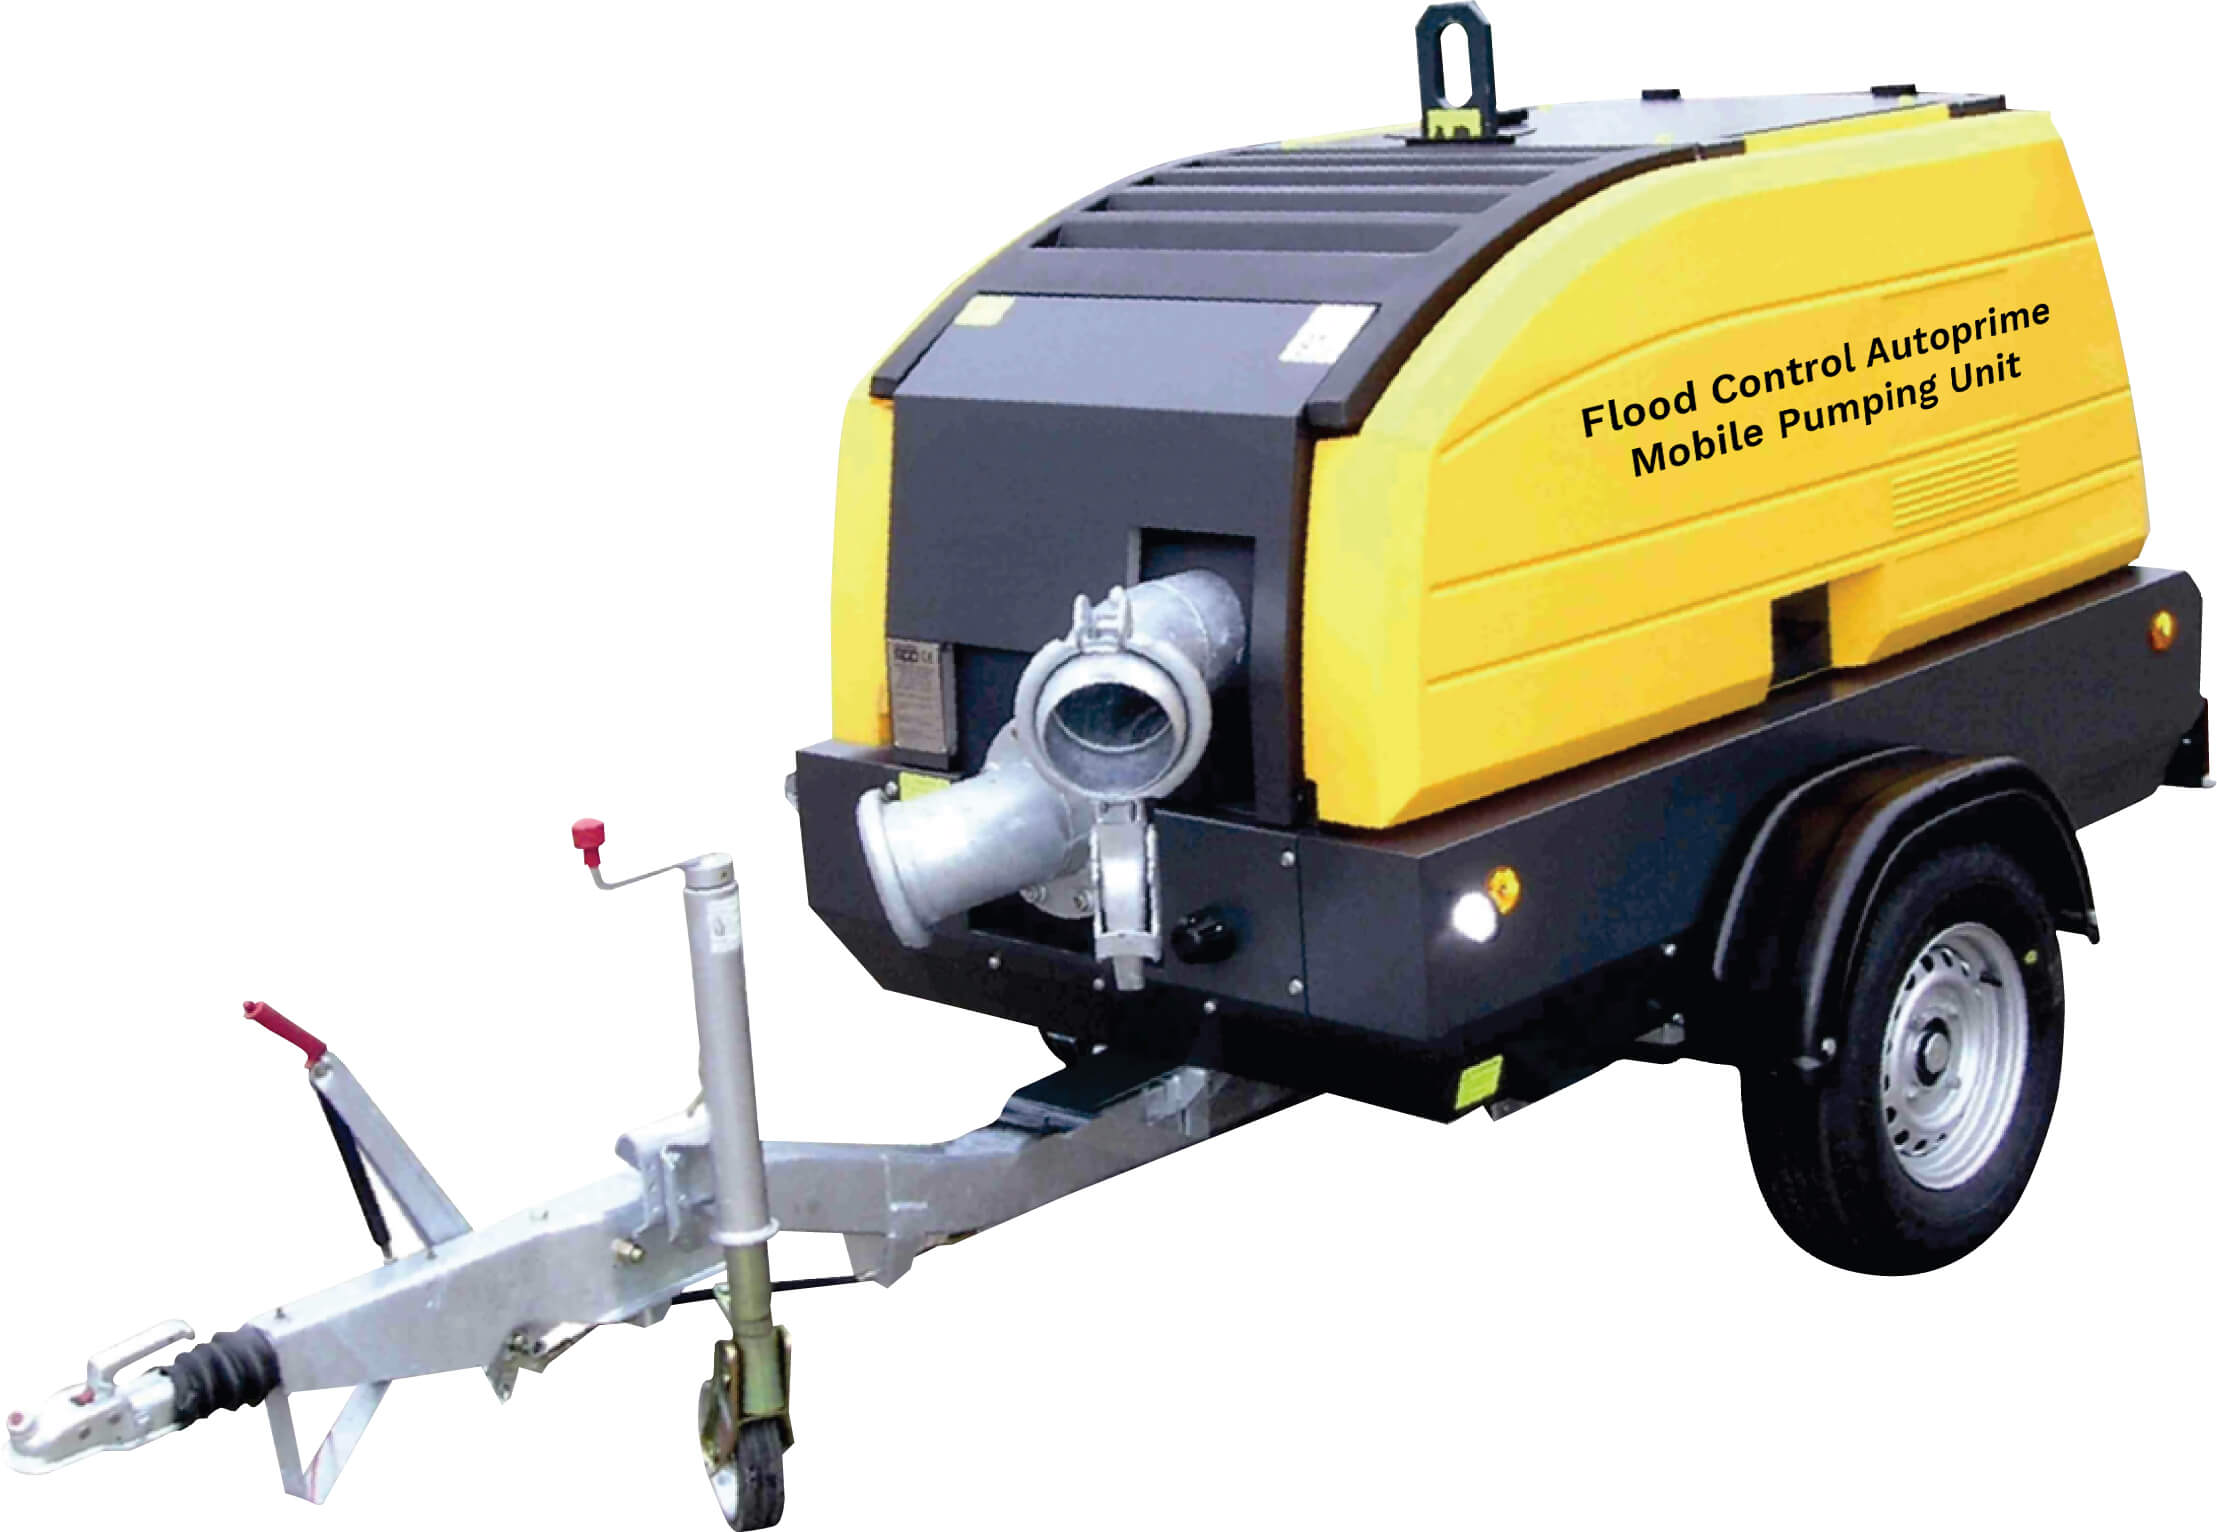 Be Monsoon Ready with KBL’s Flood-Control Autoprime Pump Unit 